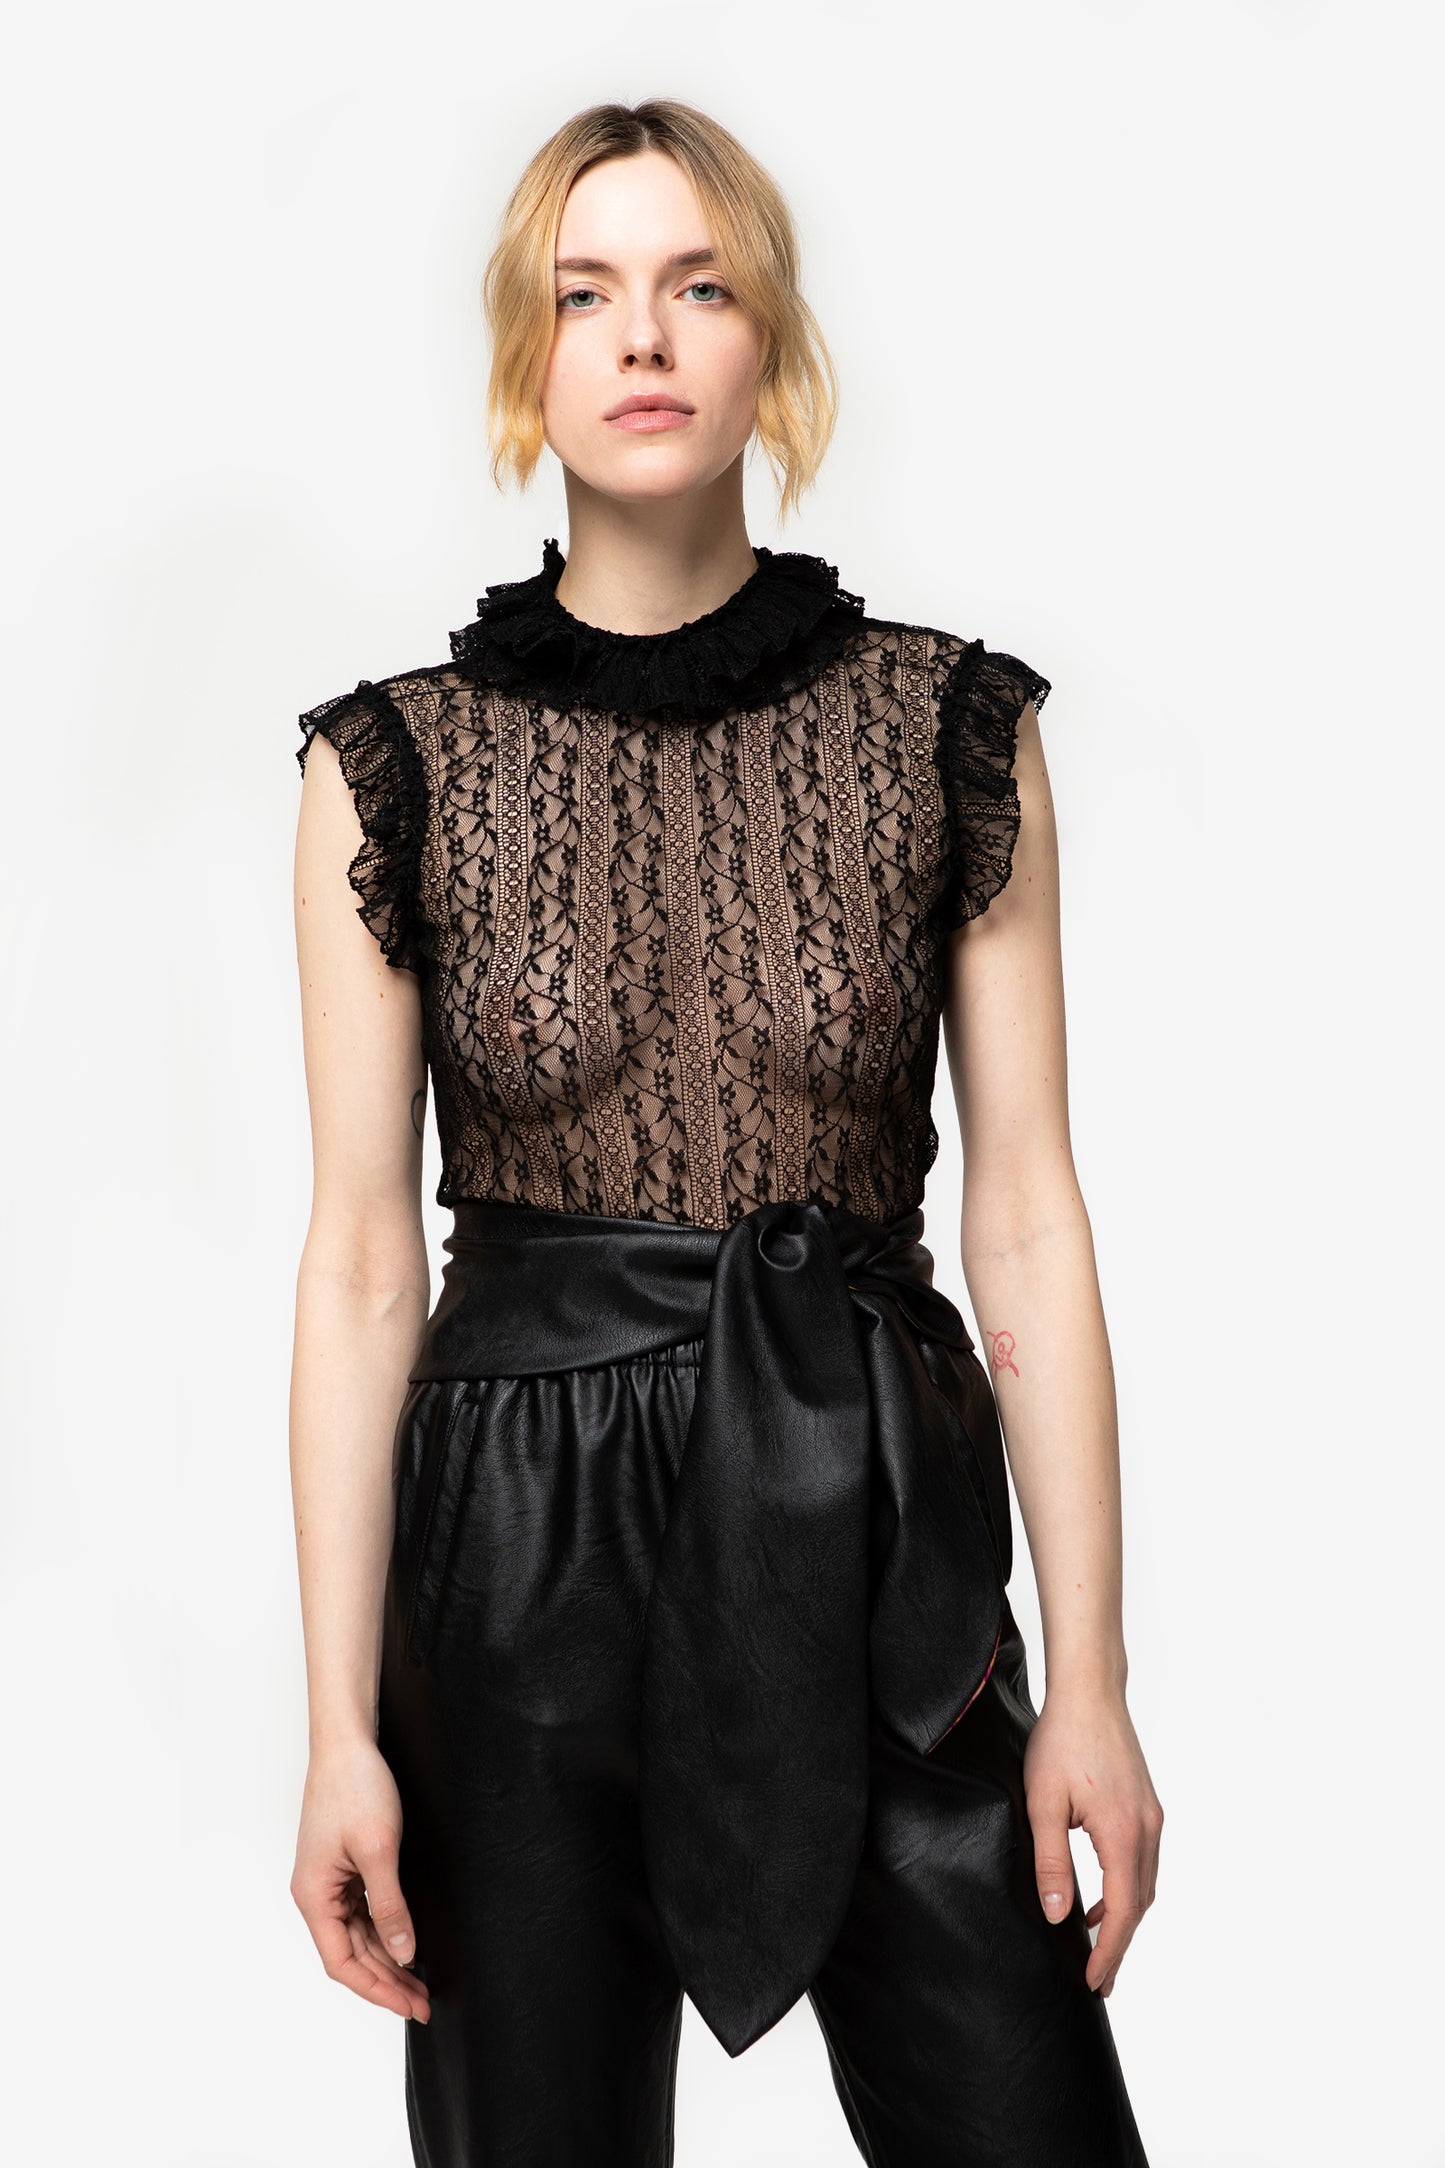 HESTER - Undress lace top